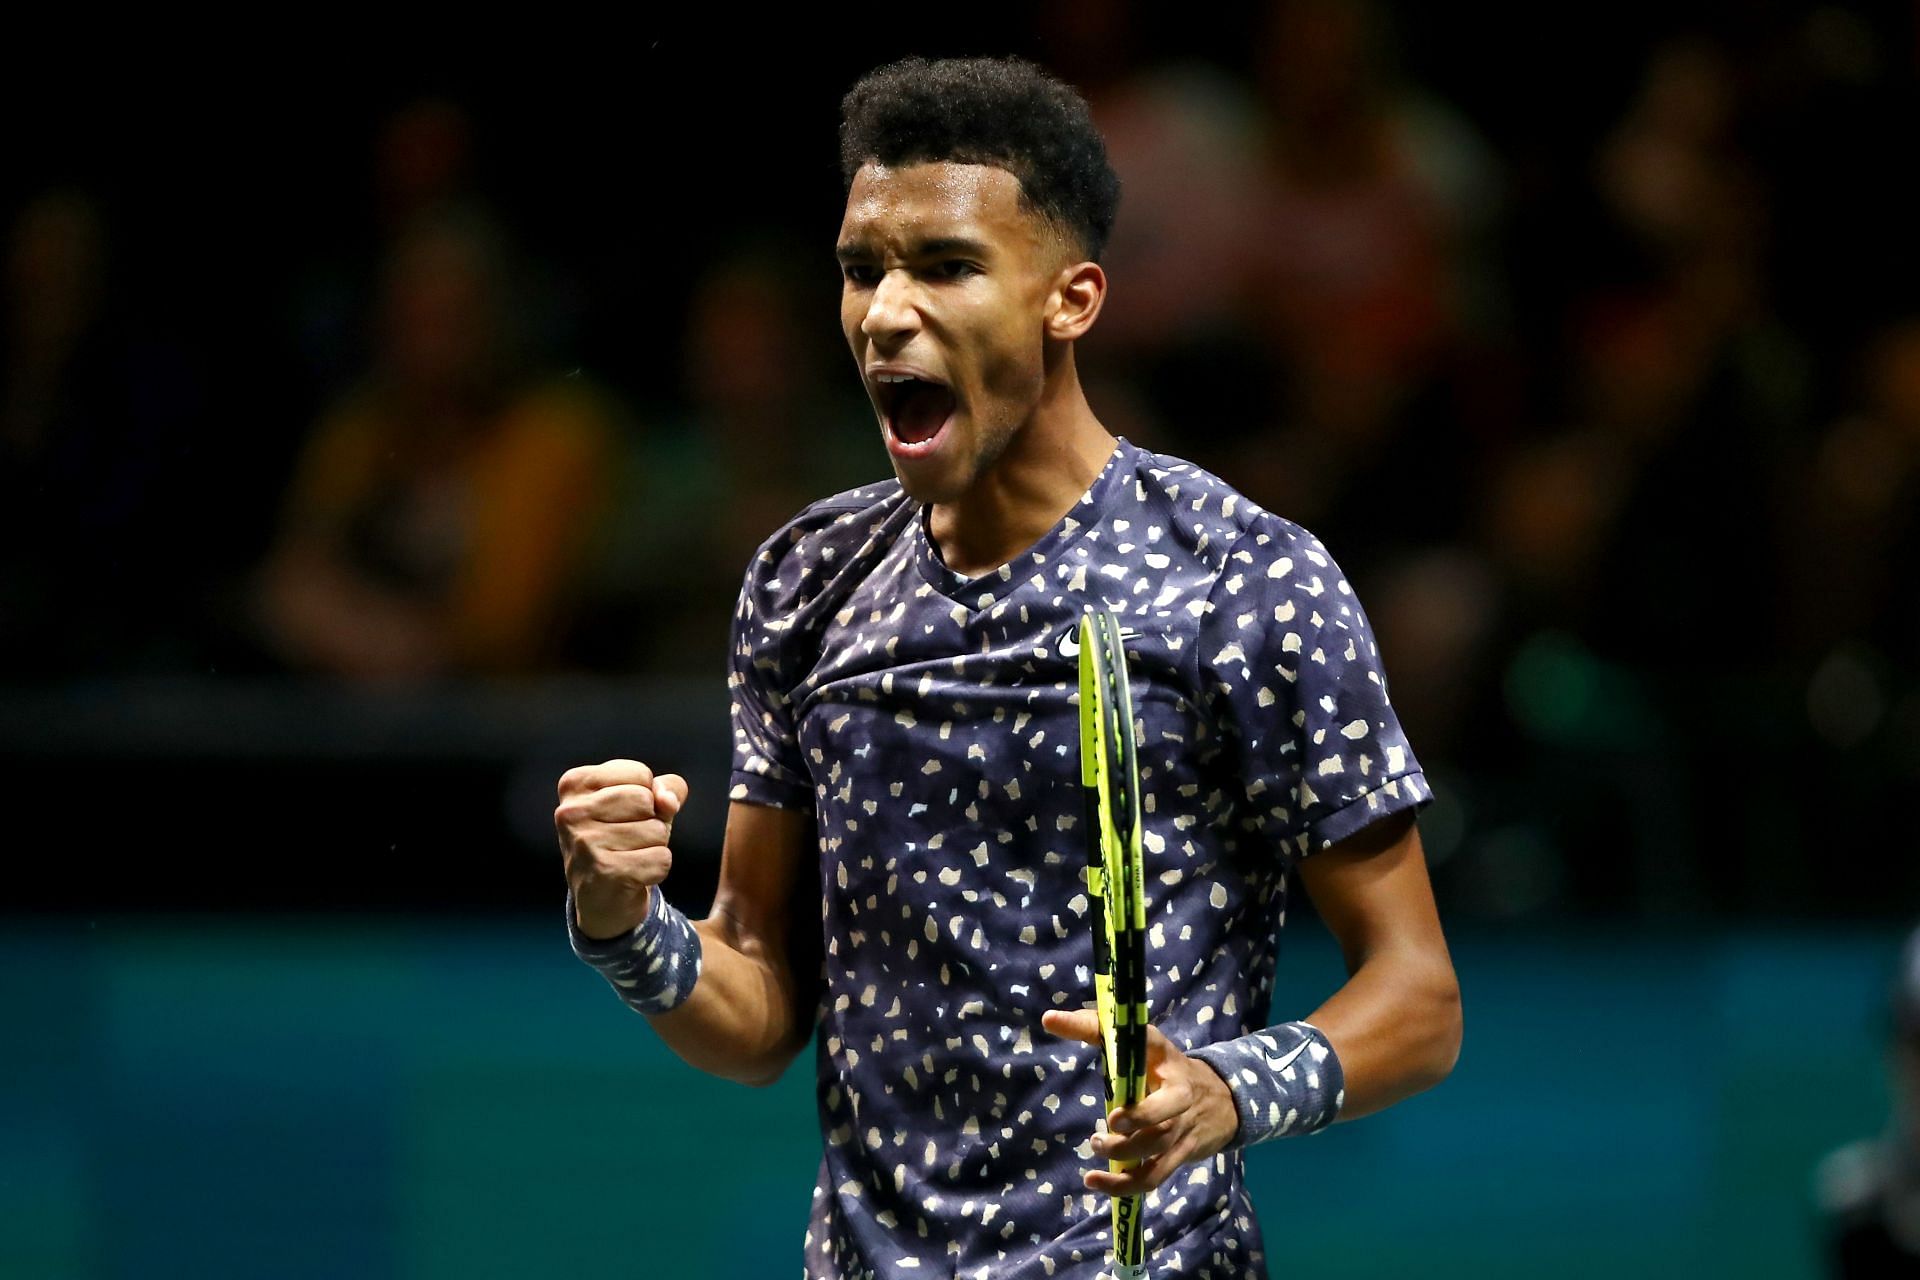 Auger-Aliassime will look to enter a third final of the season and lift a second title